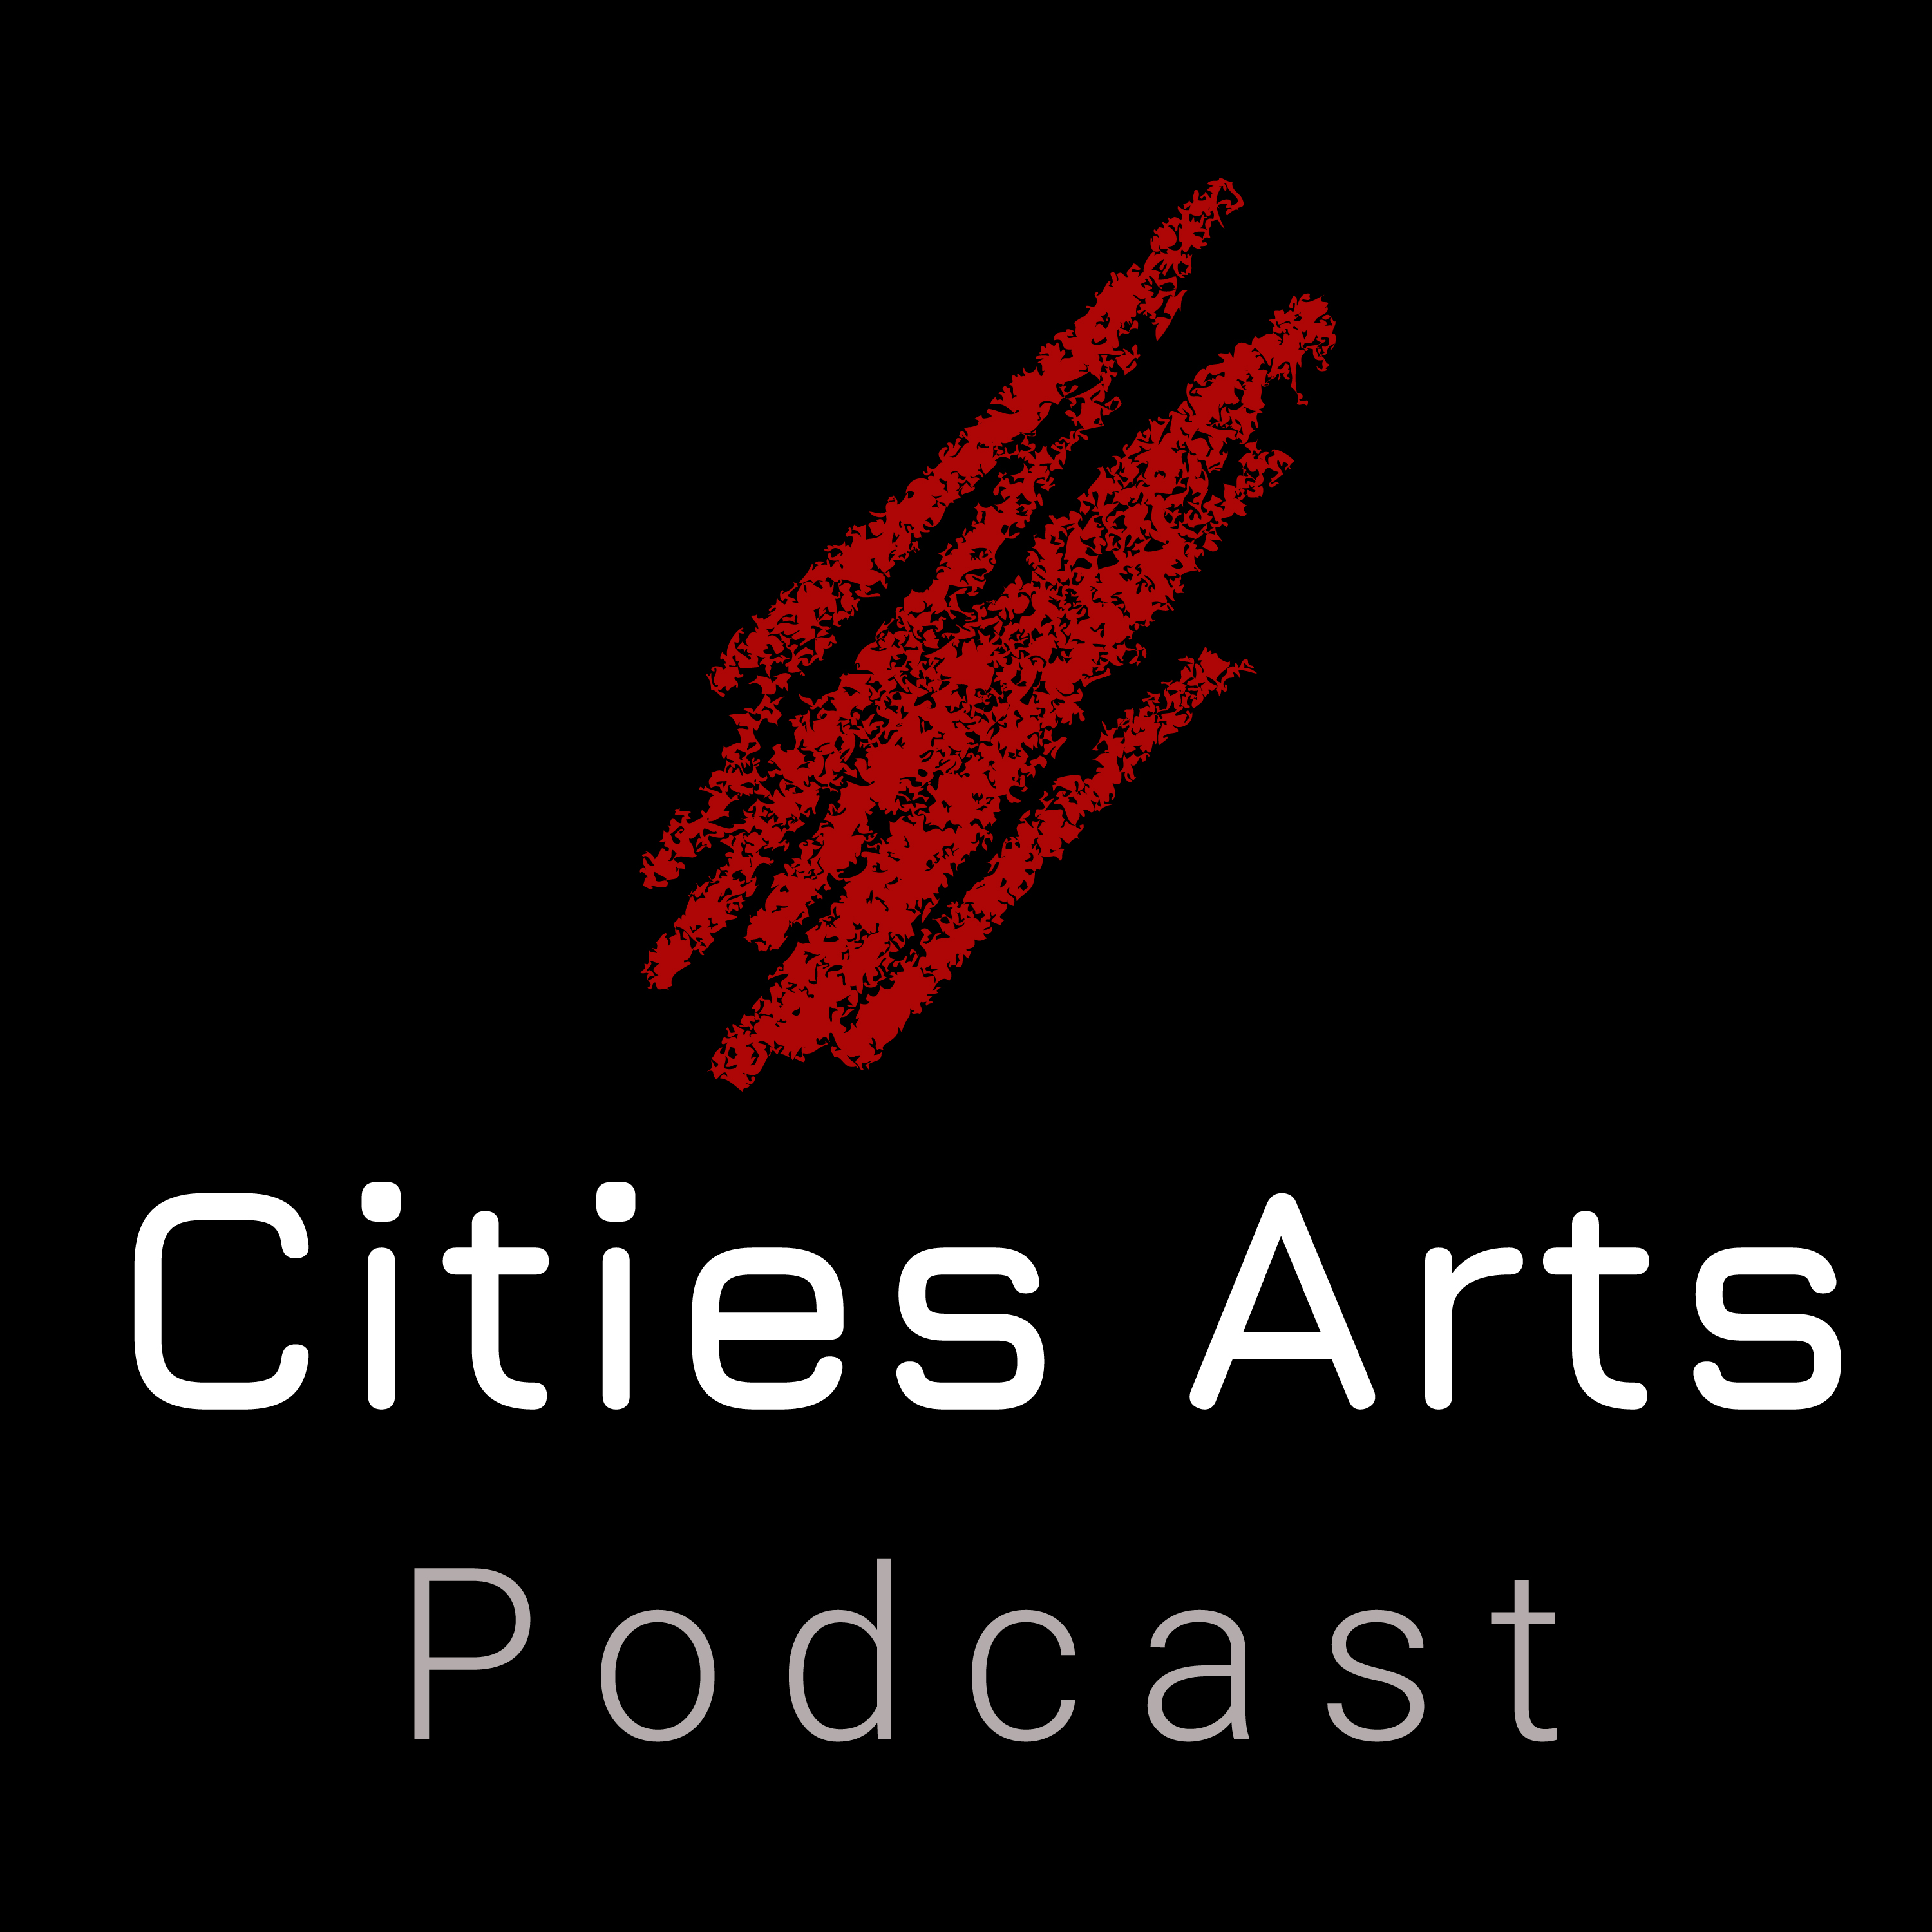 The Cities Arts Podcast